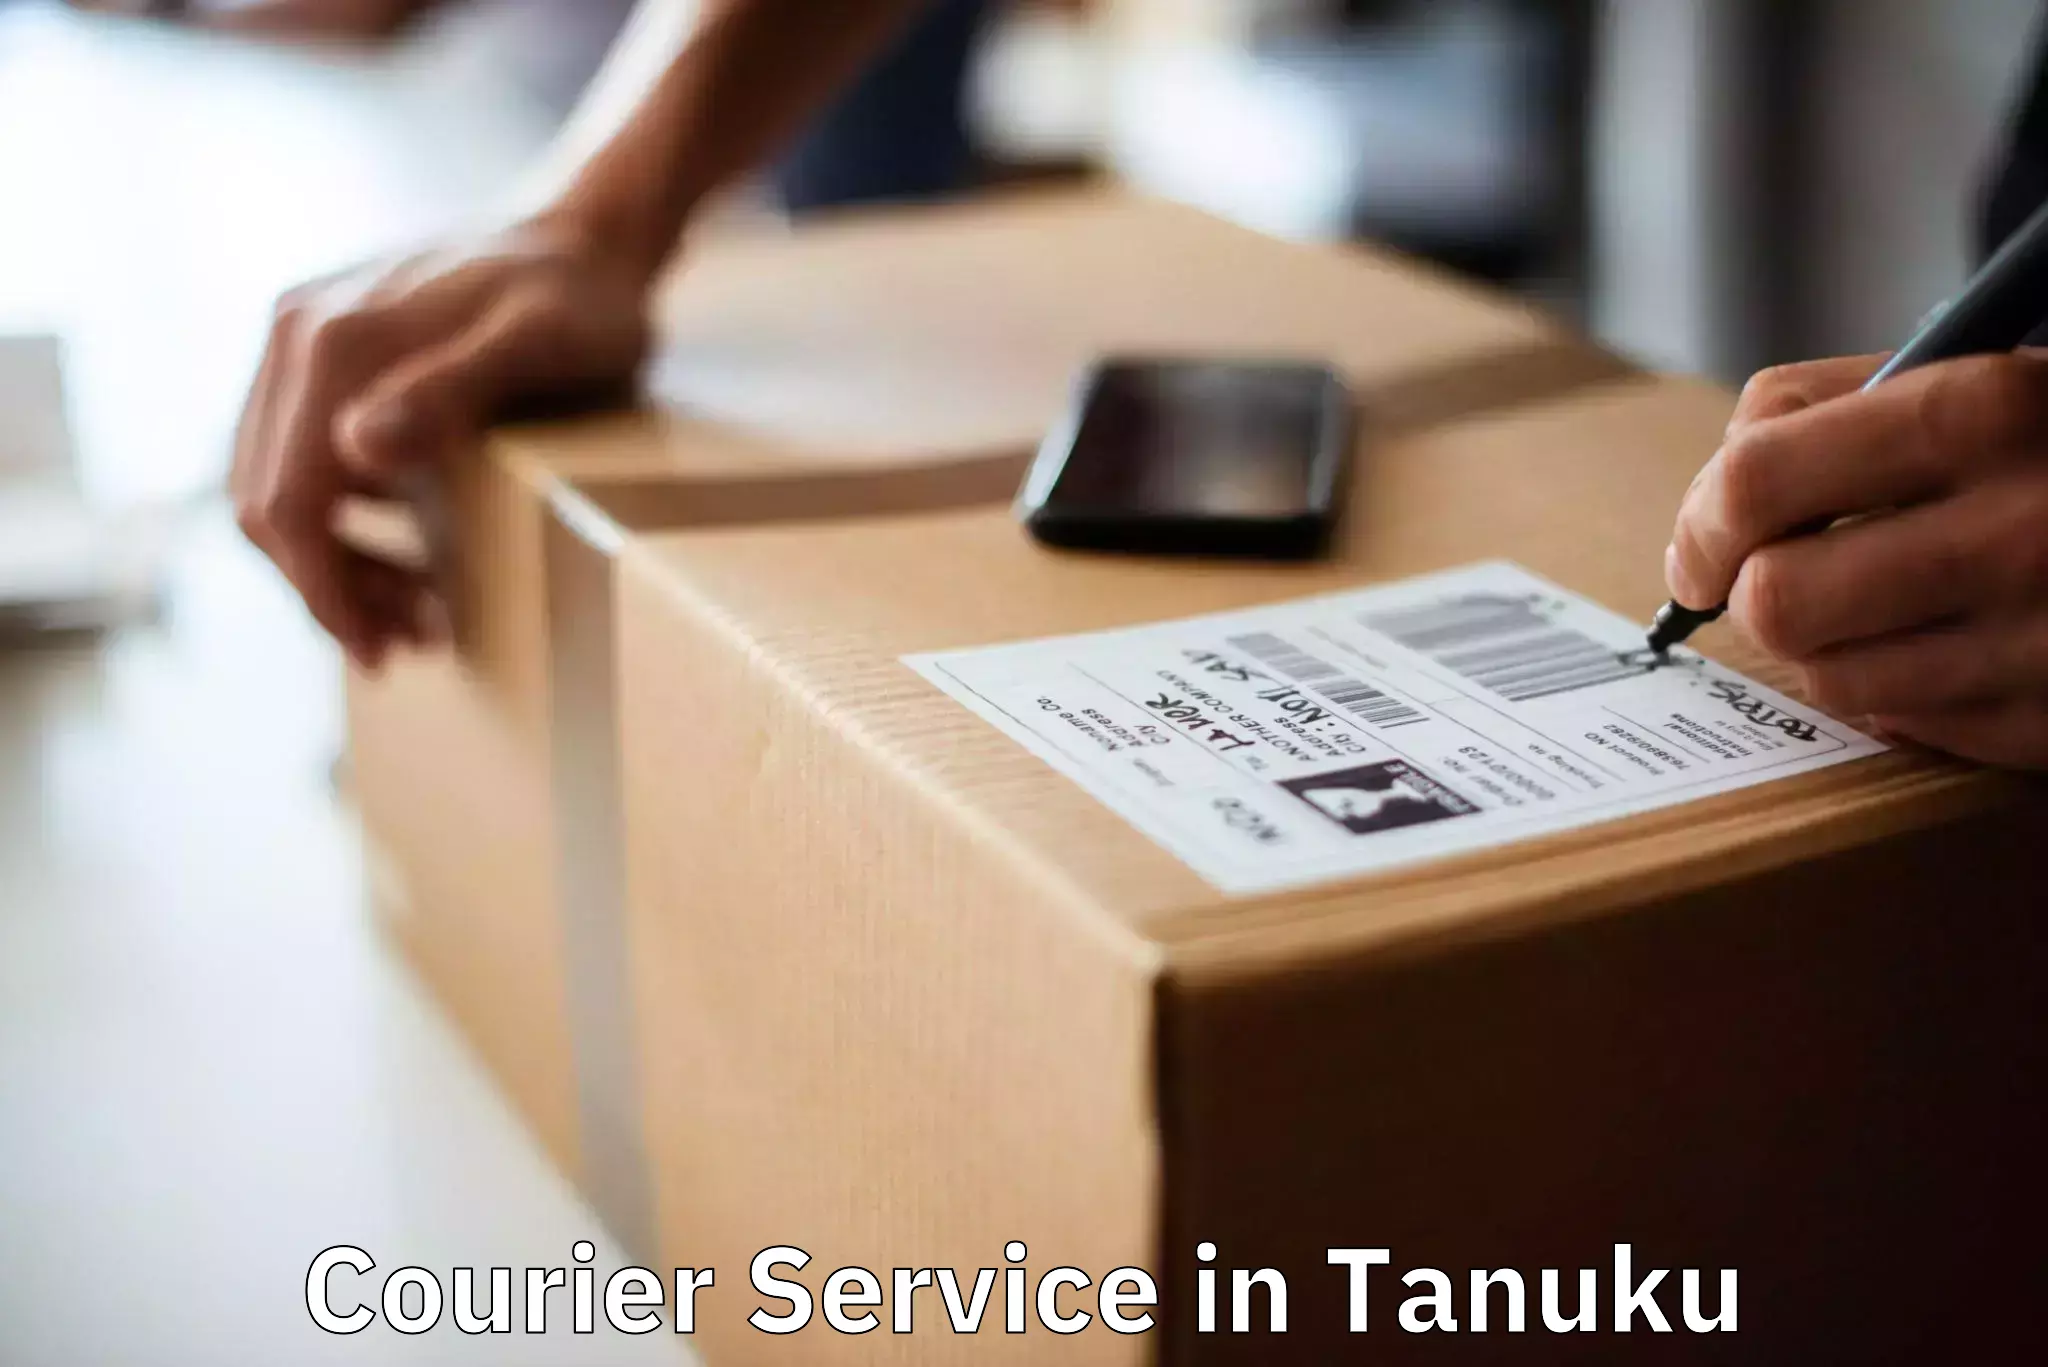 Automated shipping processes in Tanuku